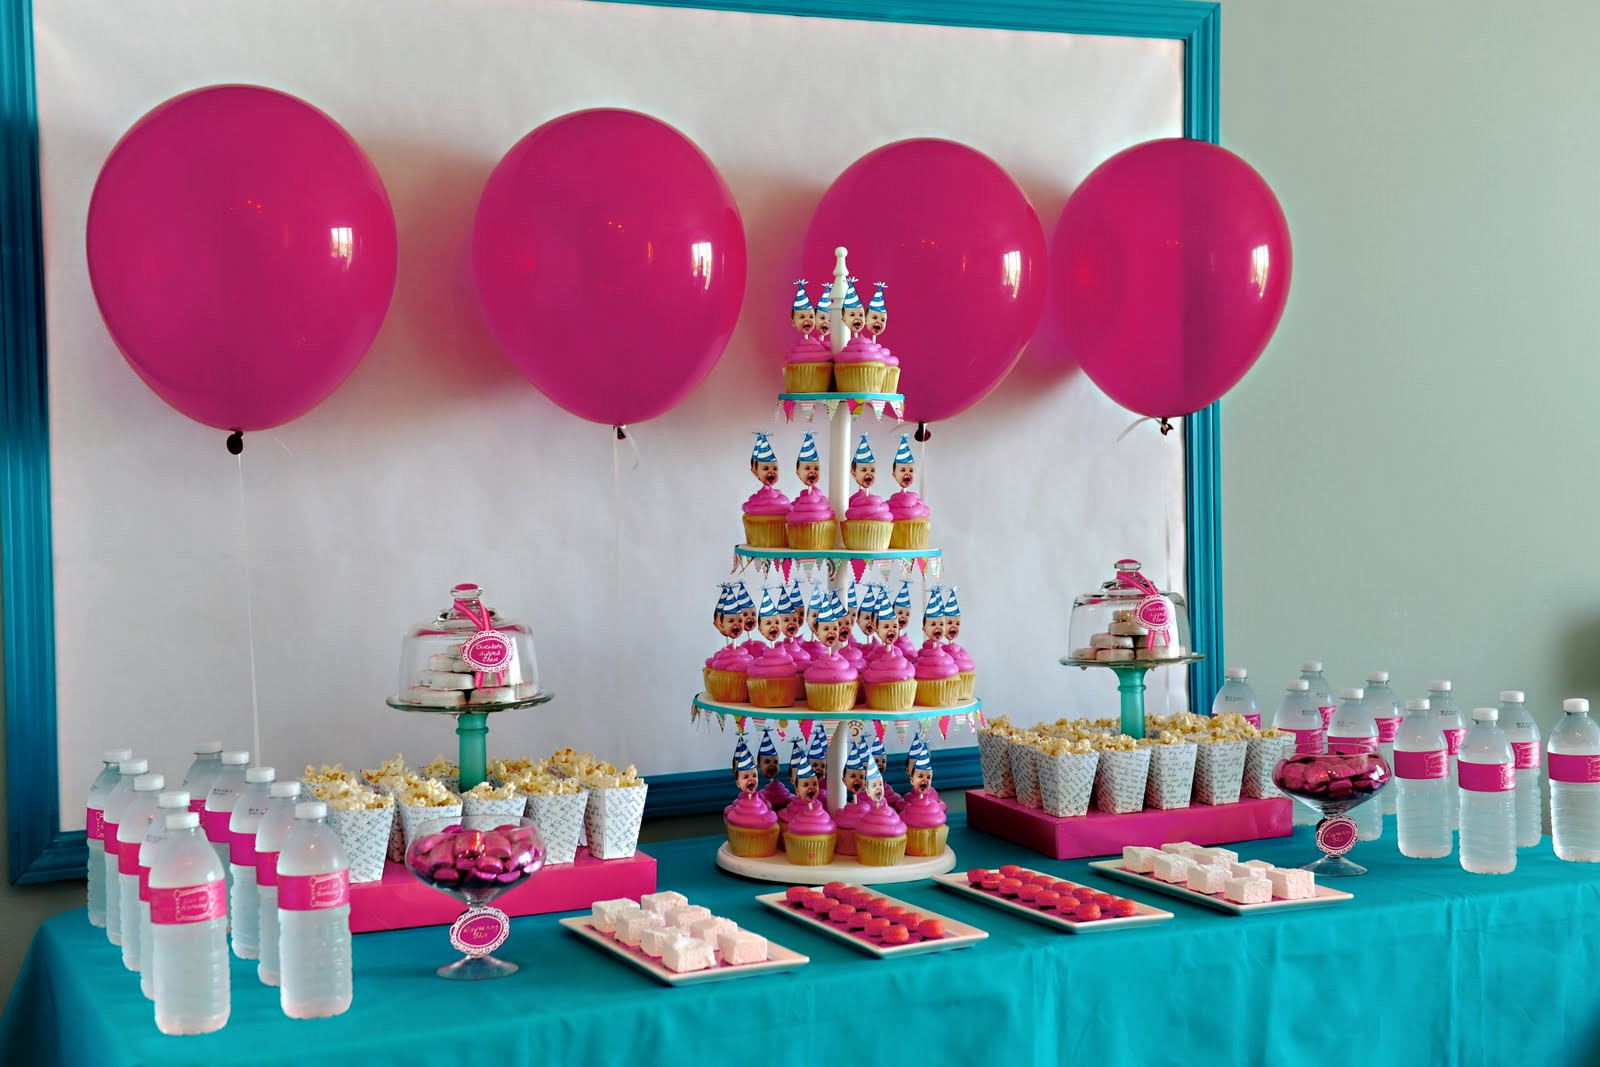 Birthday Party Ideas For 10 Year Old Girls
 Elle Belle Creative e Year Old in a Flash The Dessert